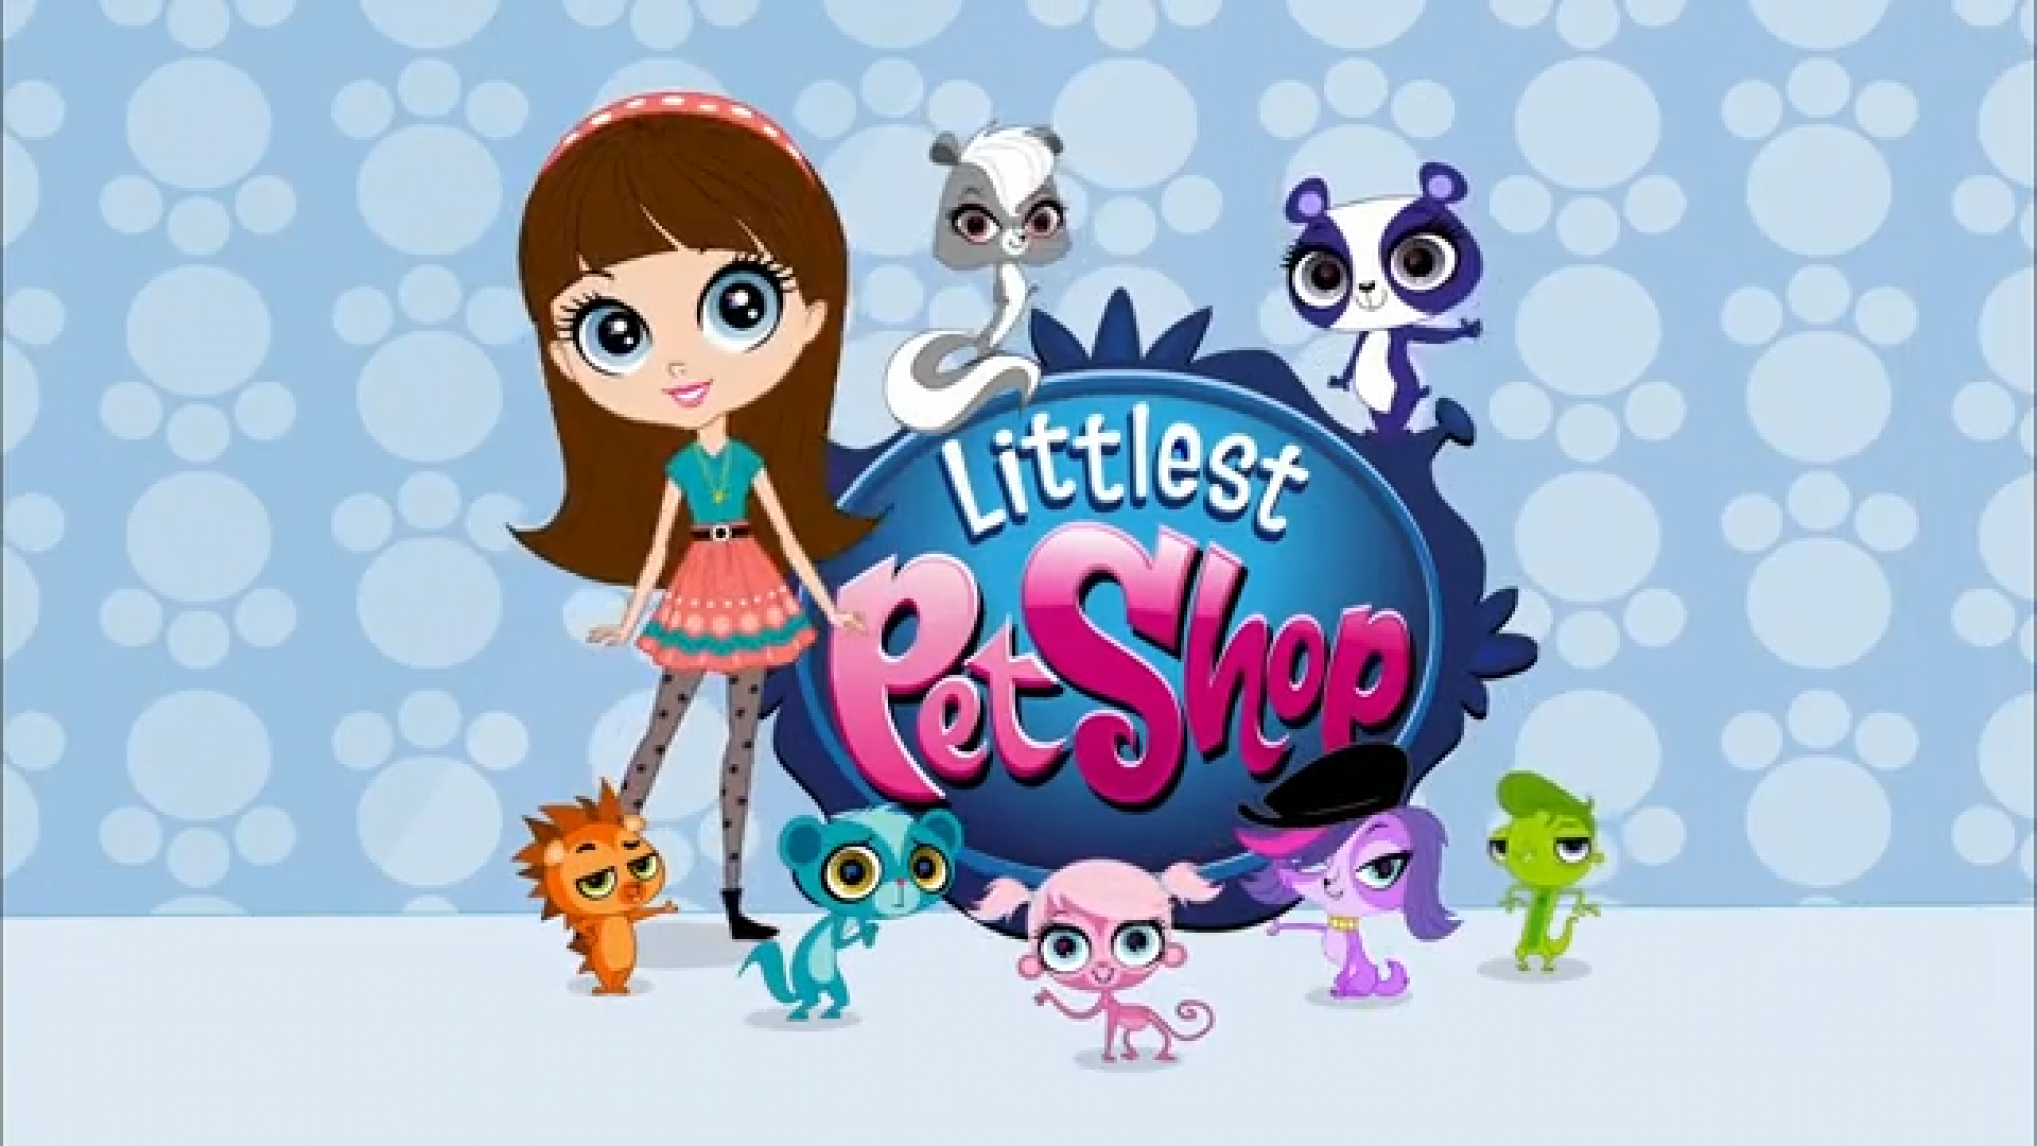 Littlest Pet Shop - Discovery Family Series - Where To Watch